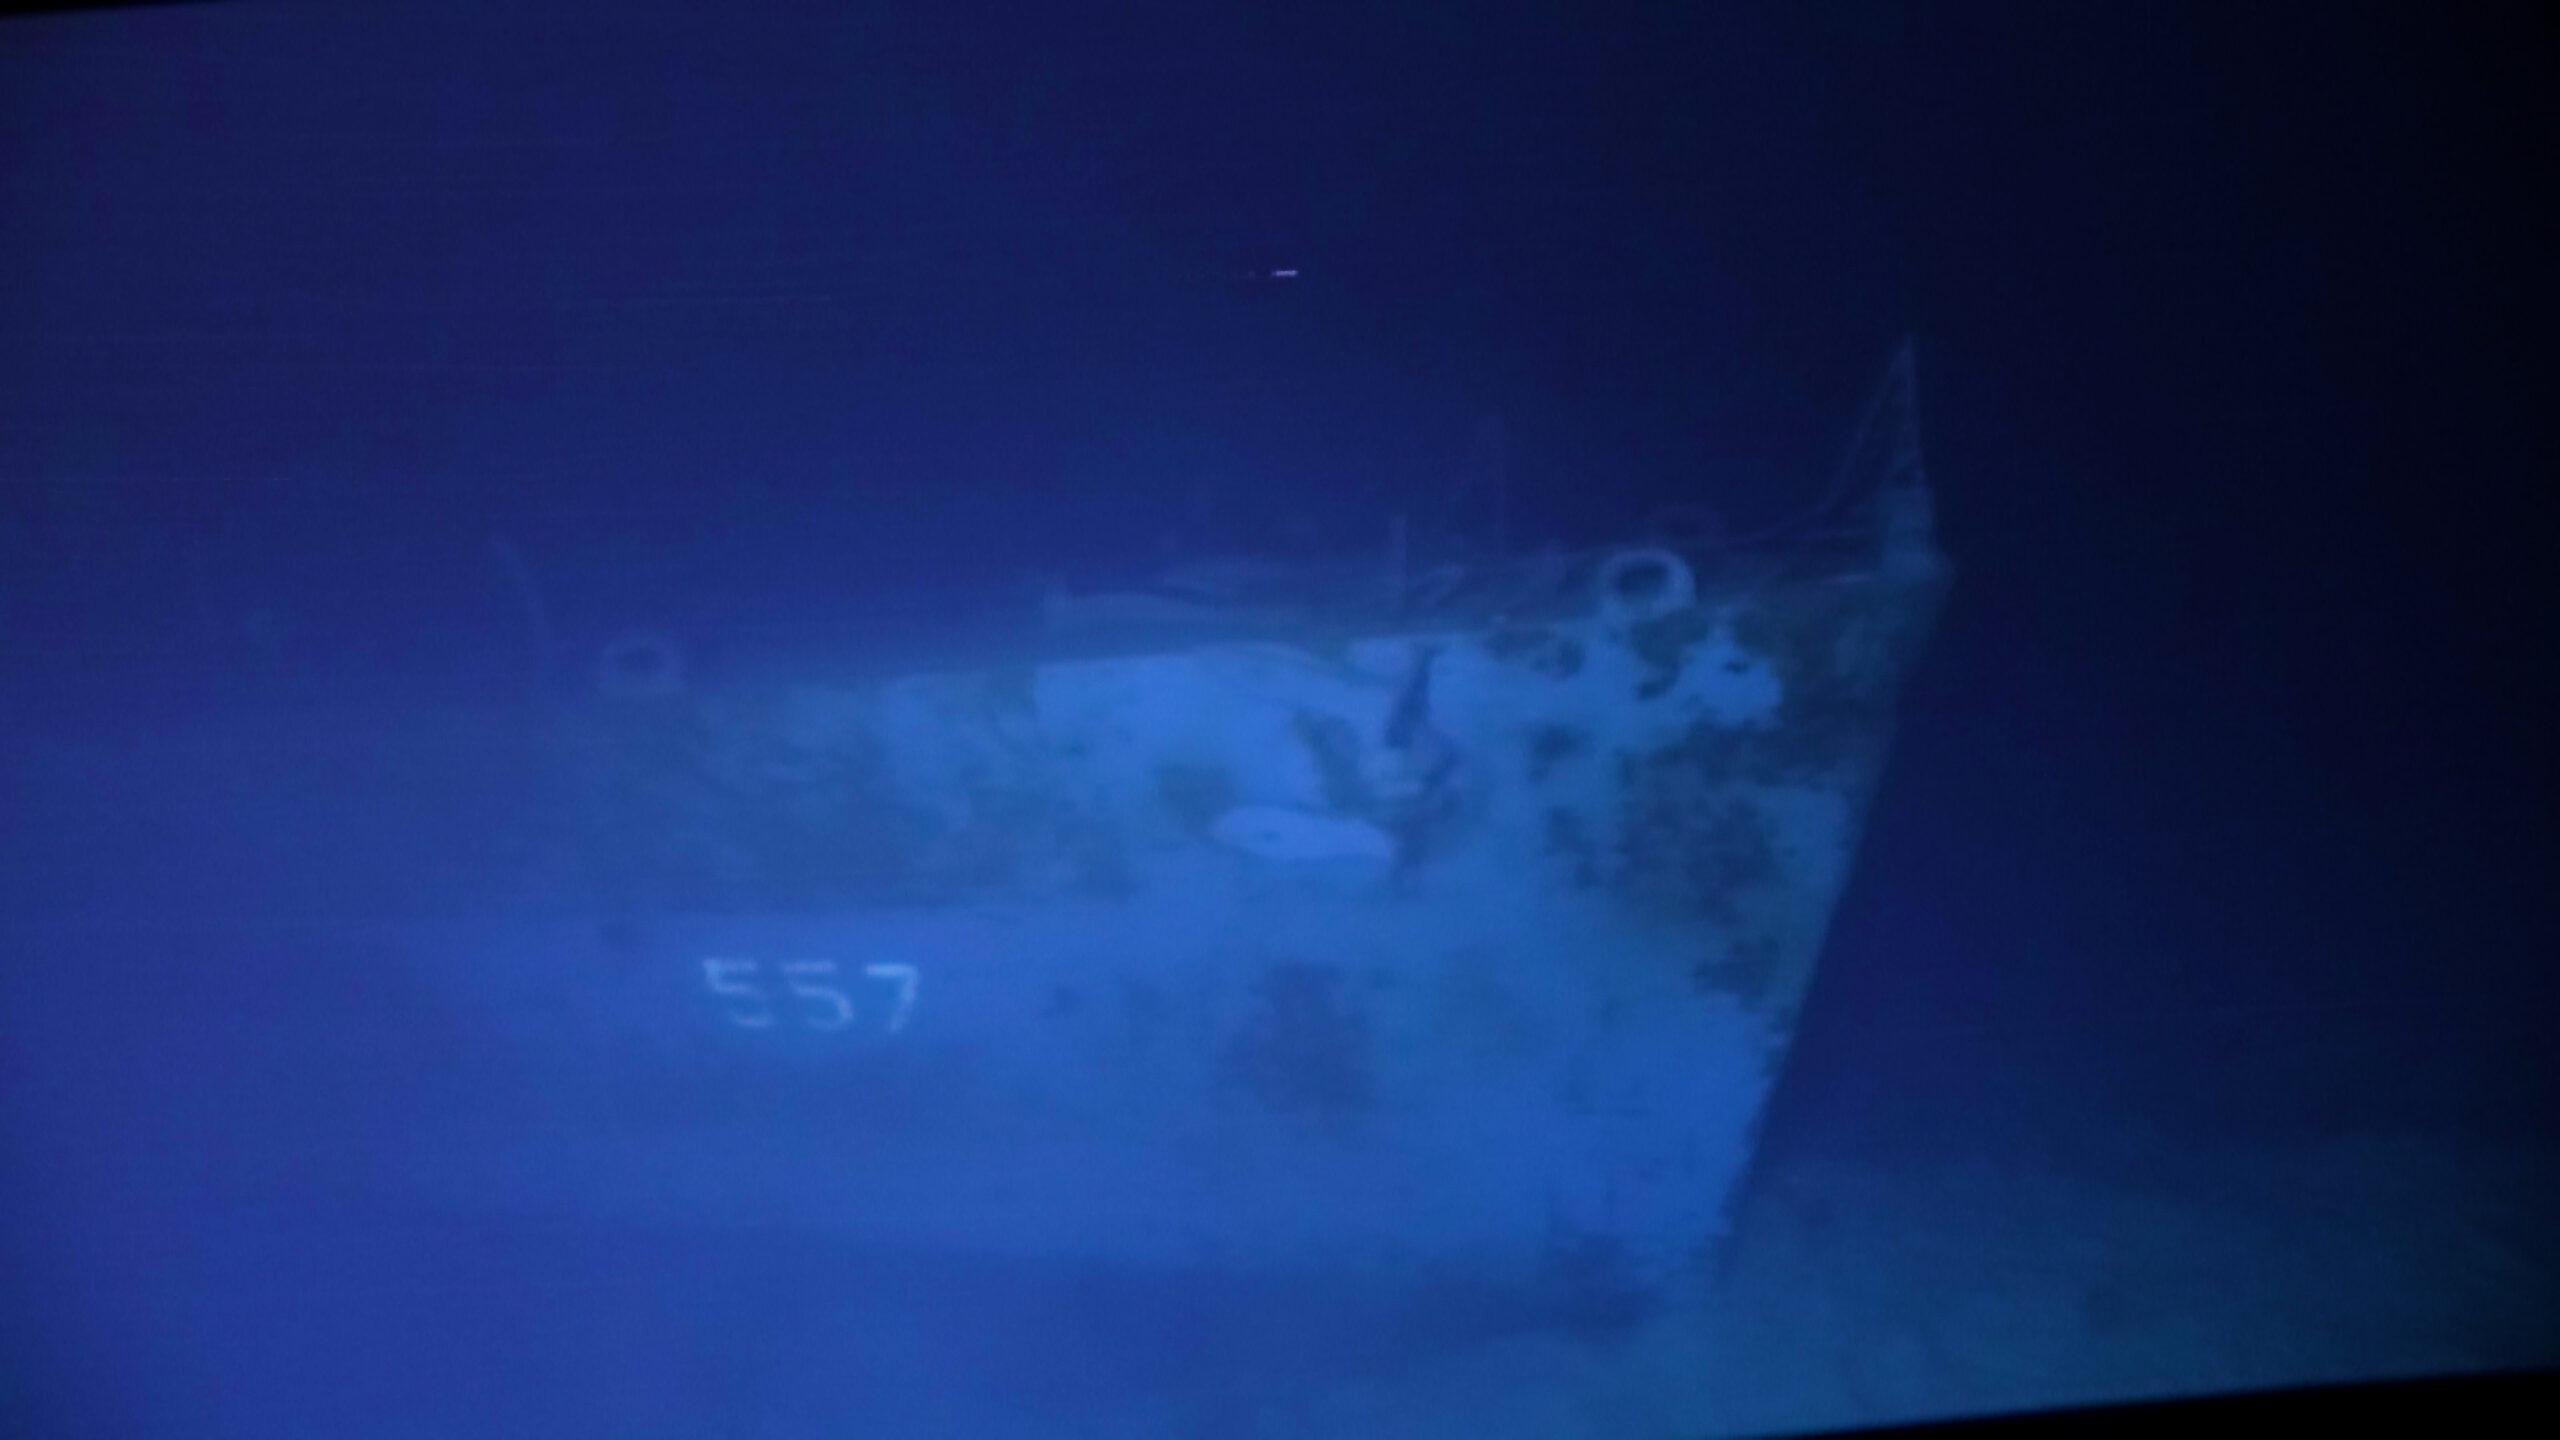 This hero WWII destroyer was reached in the world’s deepest shipwreck dive